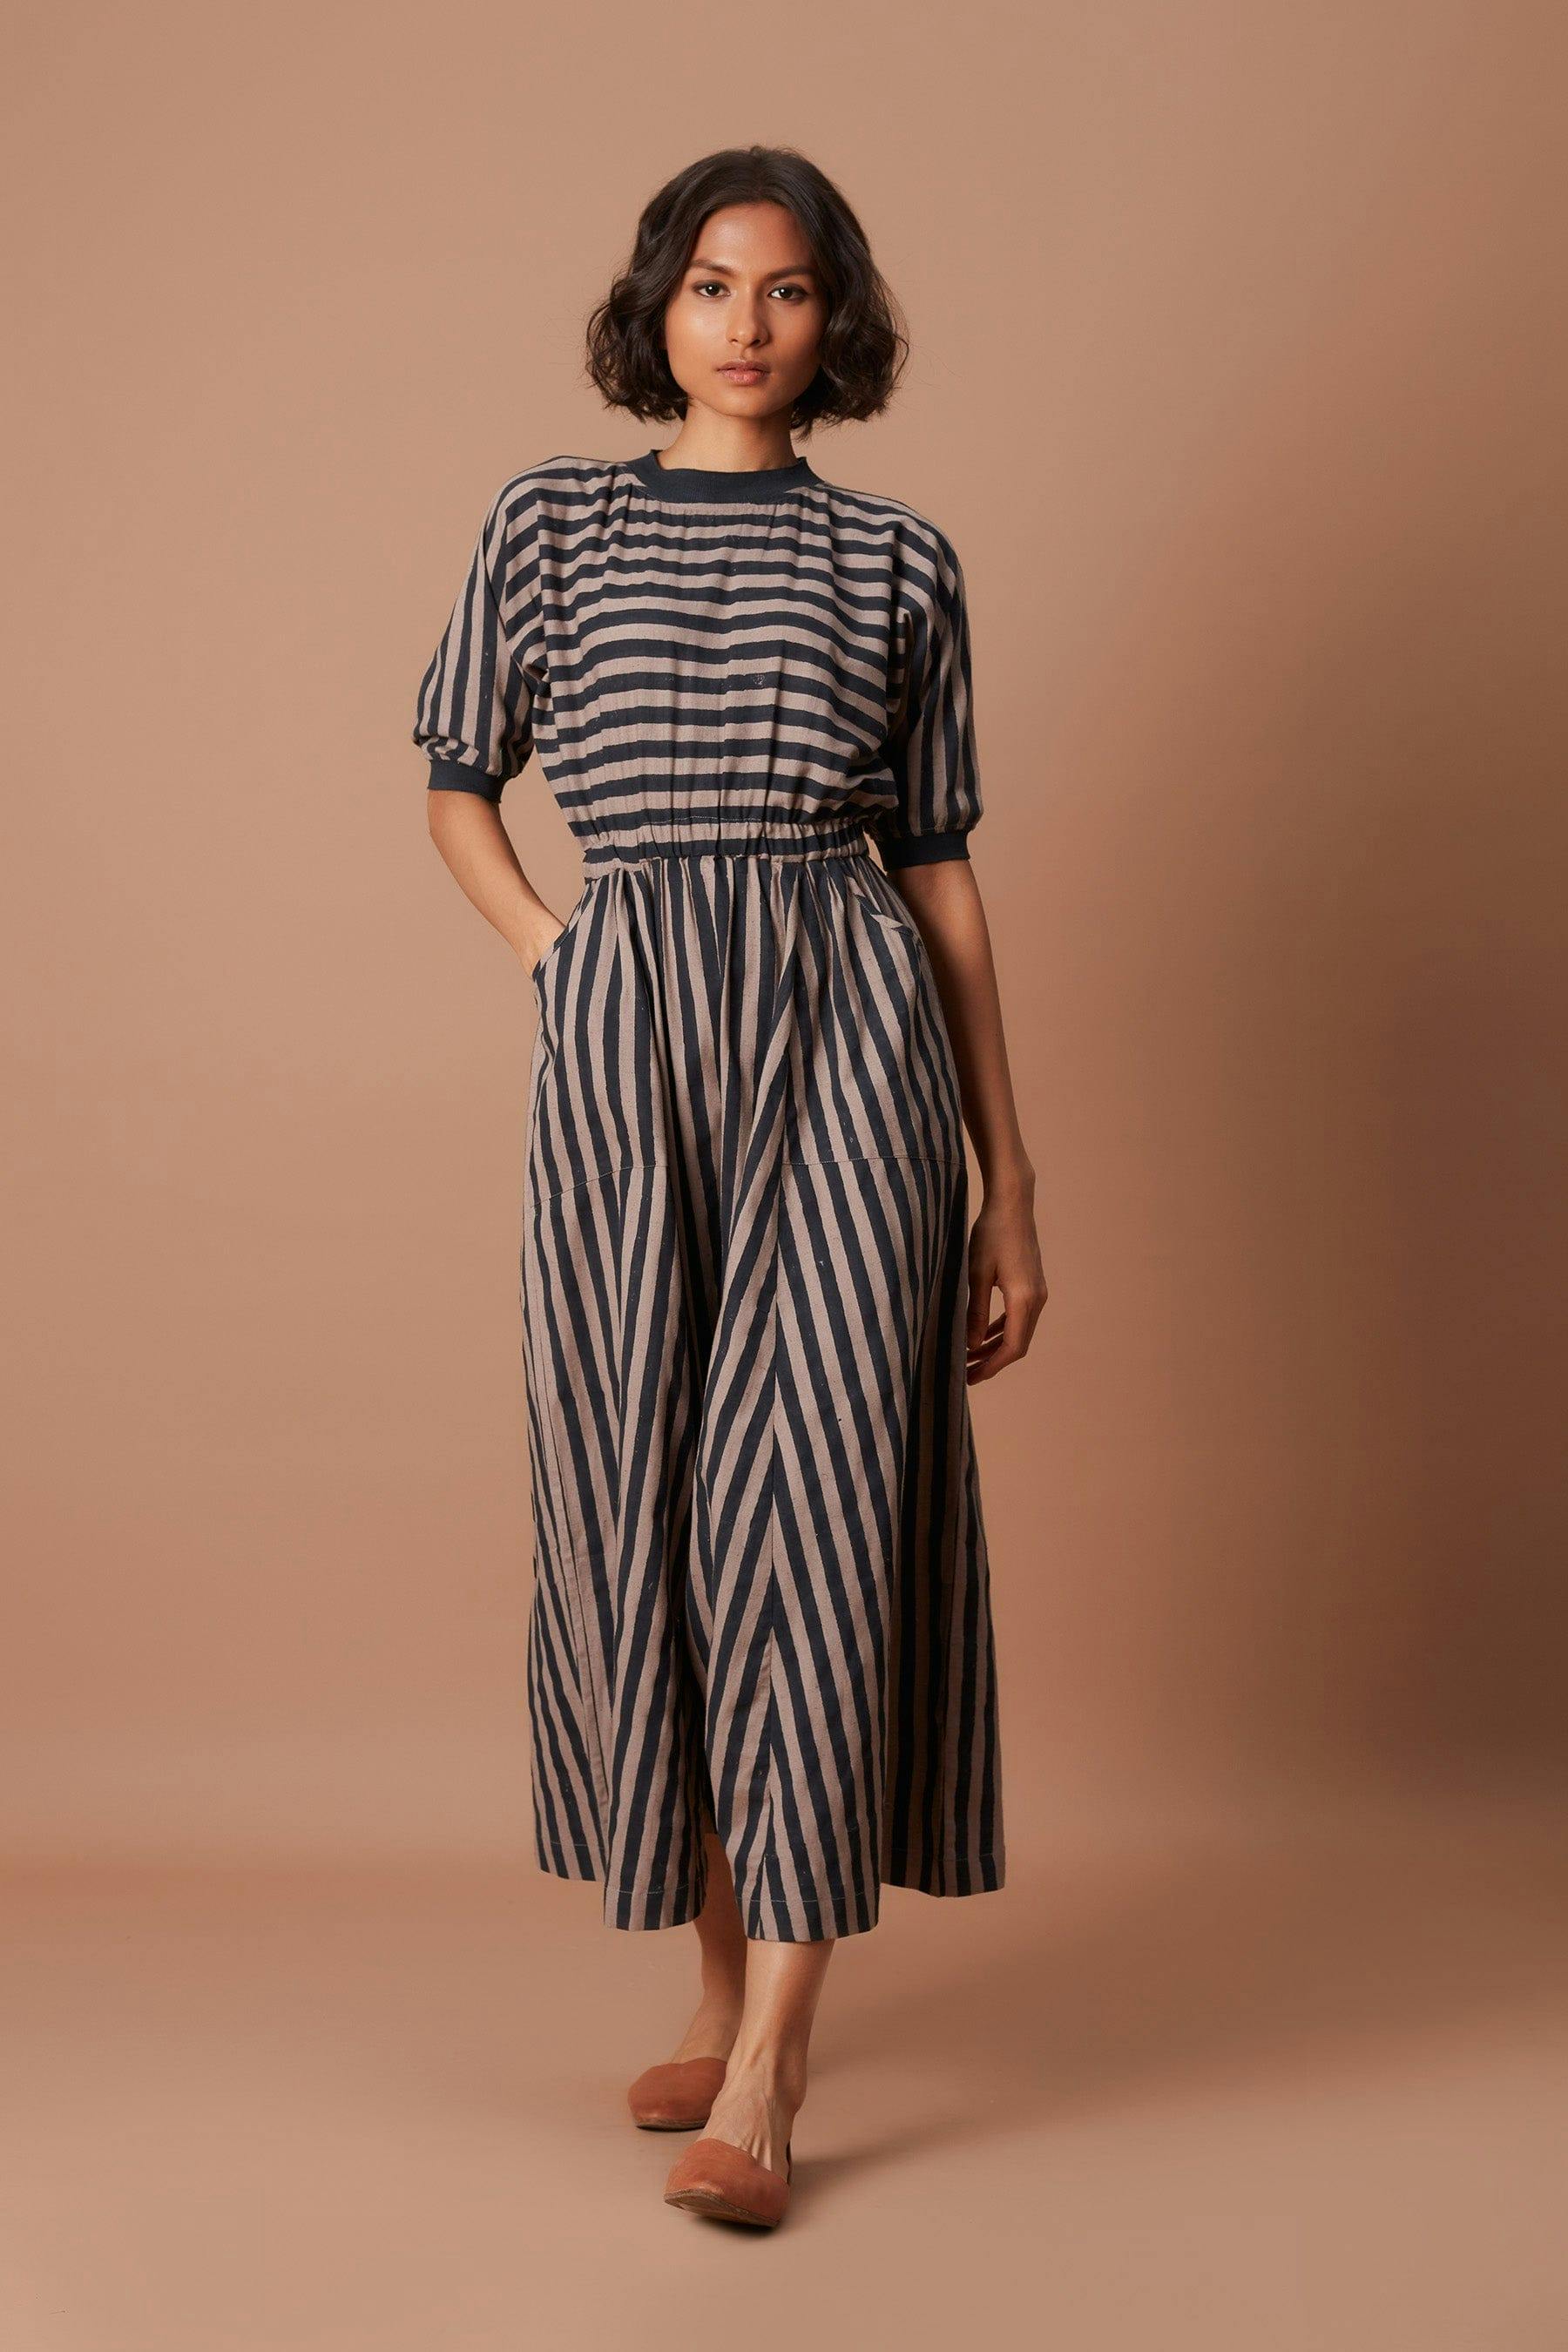 Grey and Charcoal Striped Mati Sphara Jumpsuit, a product by Style Mati